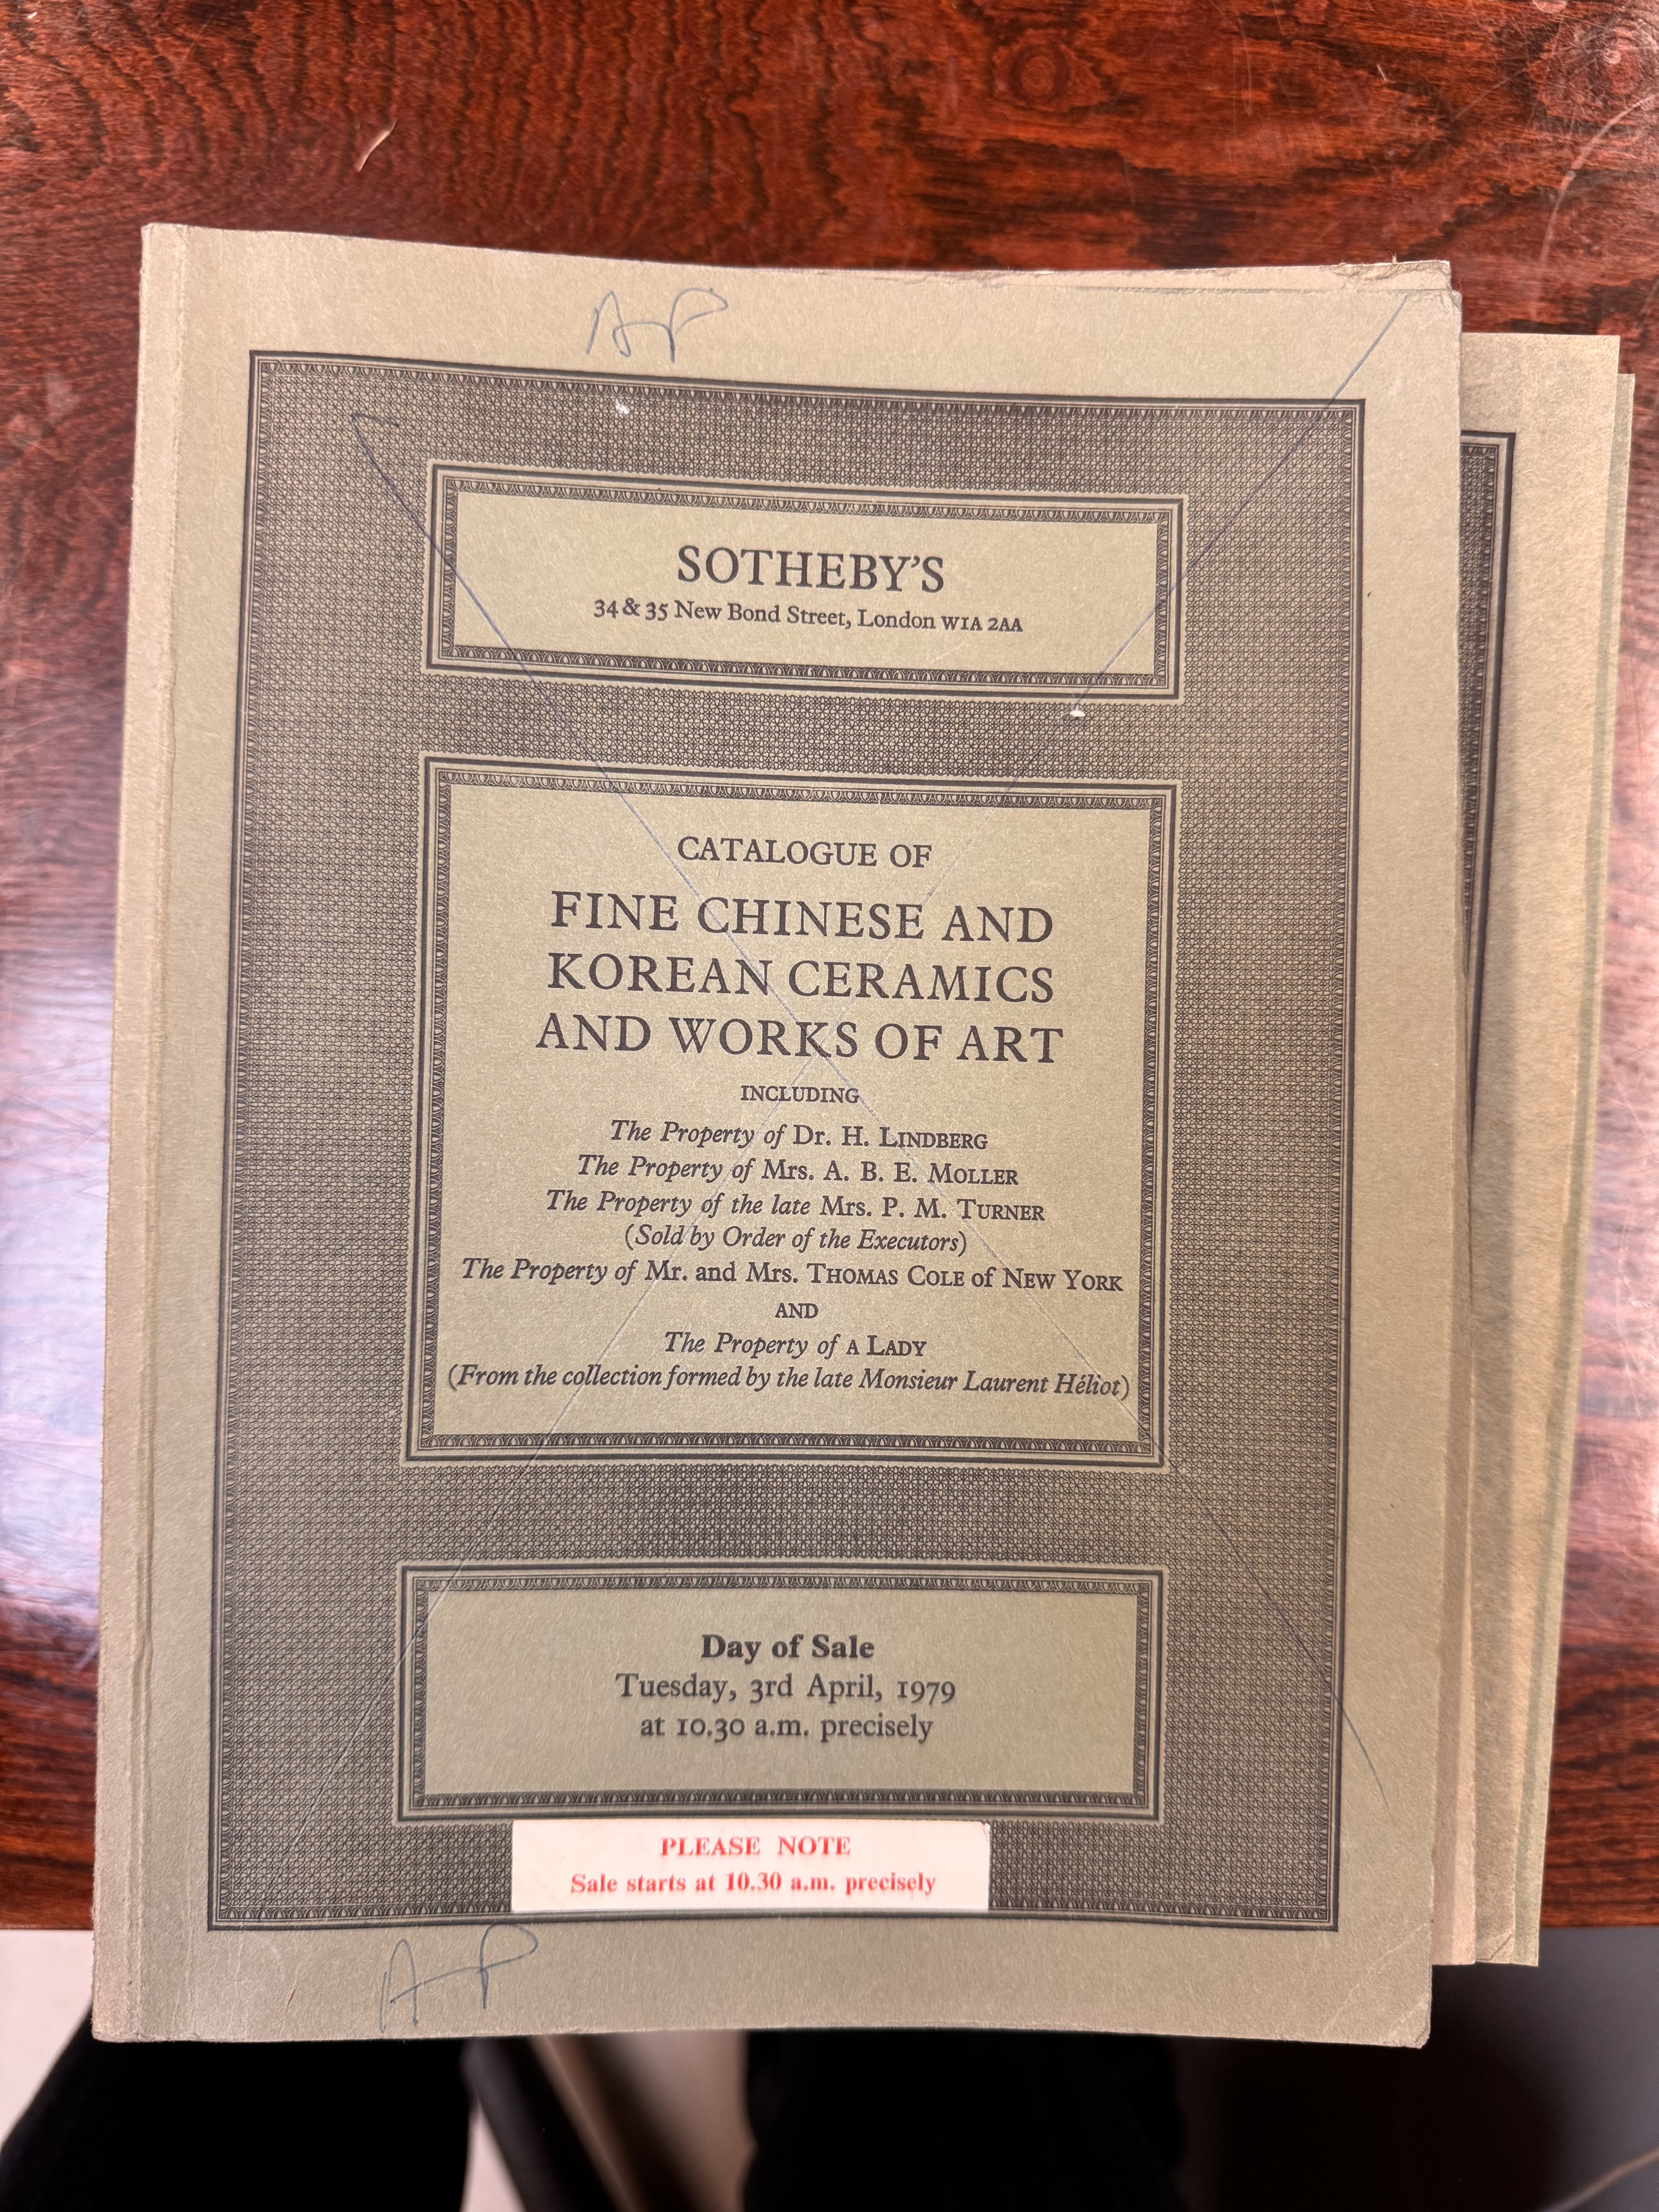 A LARGE COLLECTION OF EARLY SOTHEBY'S CHINESE ART CATALOGUES (50 VOLUMES) 早期蘇富比國藝術品硬面精裝拍賣圖錄一組 - Image 18 of 50